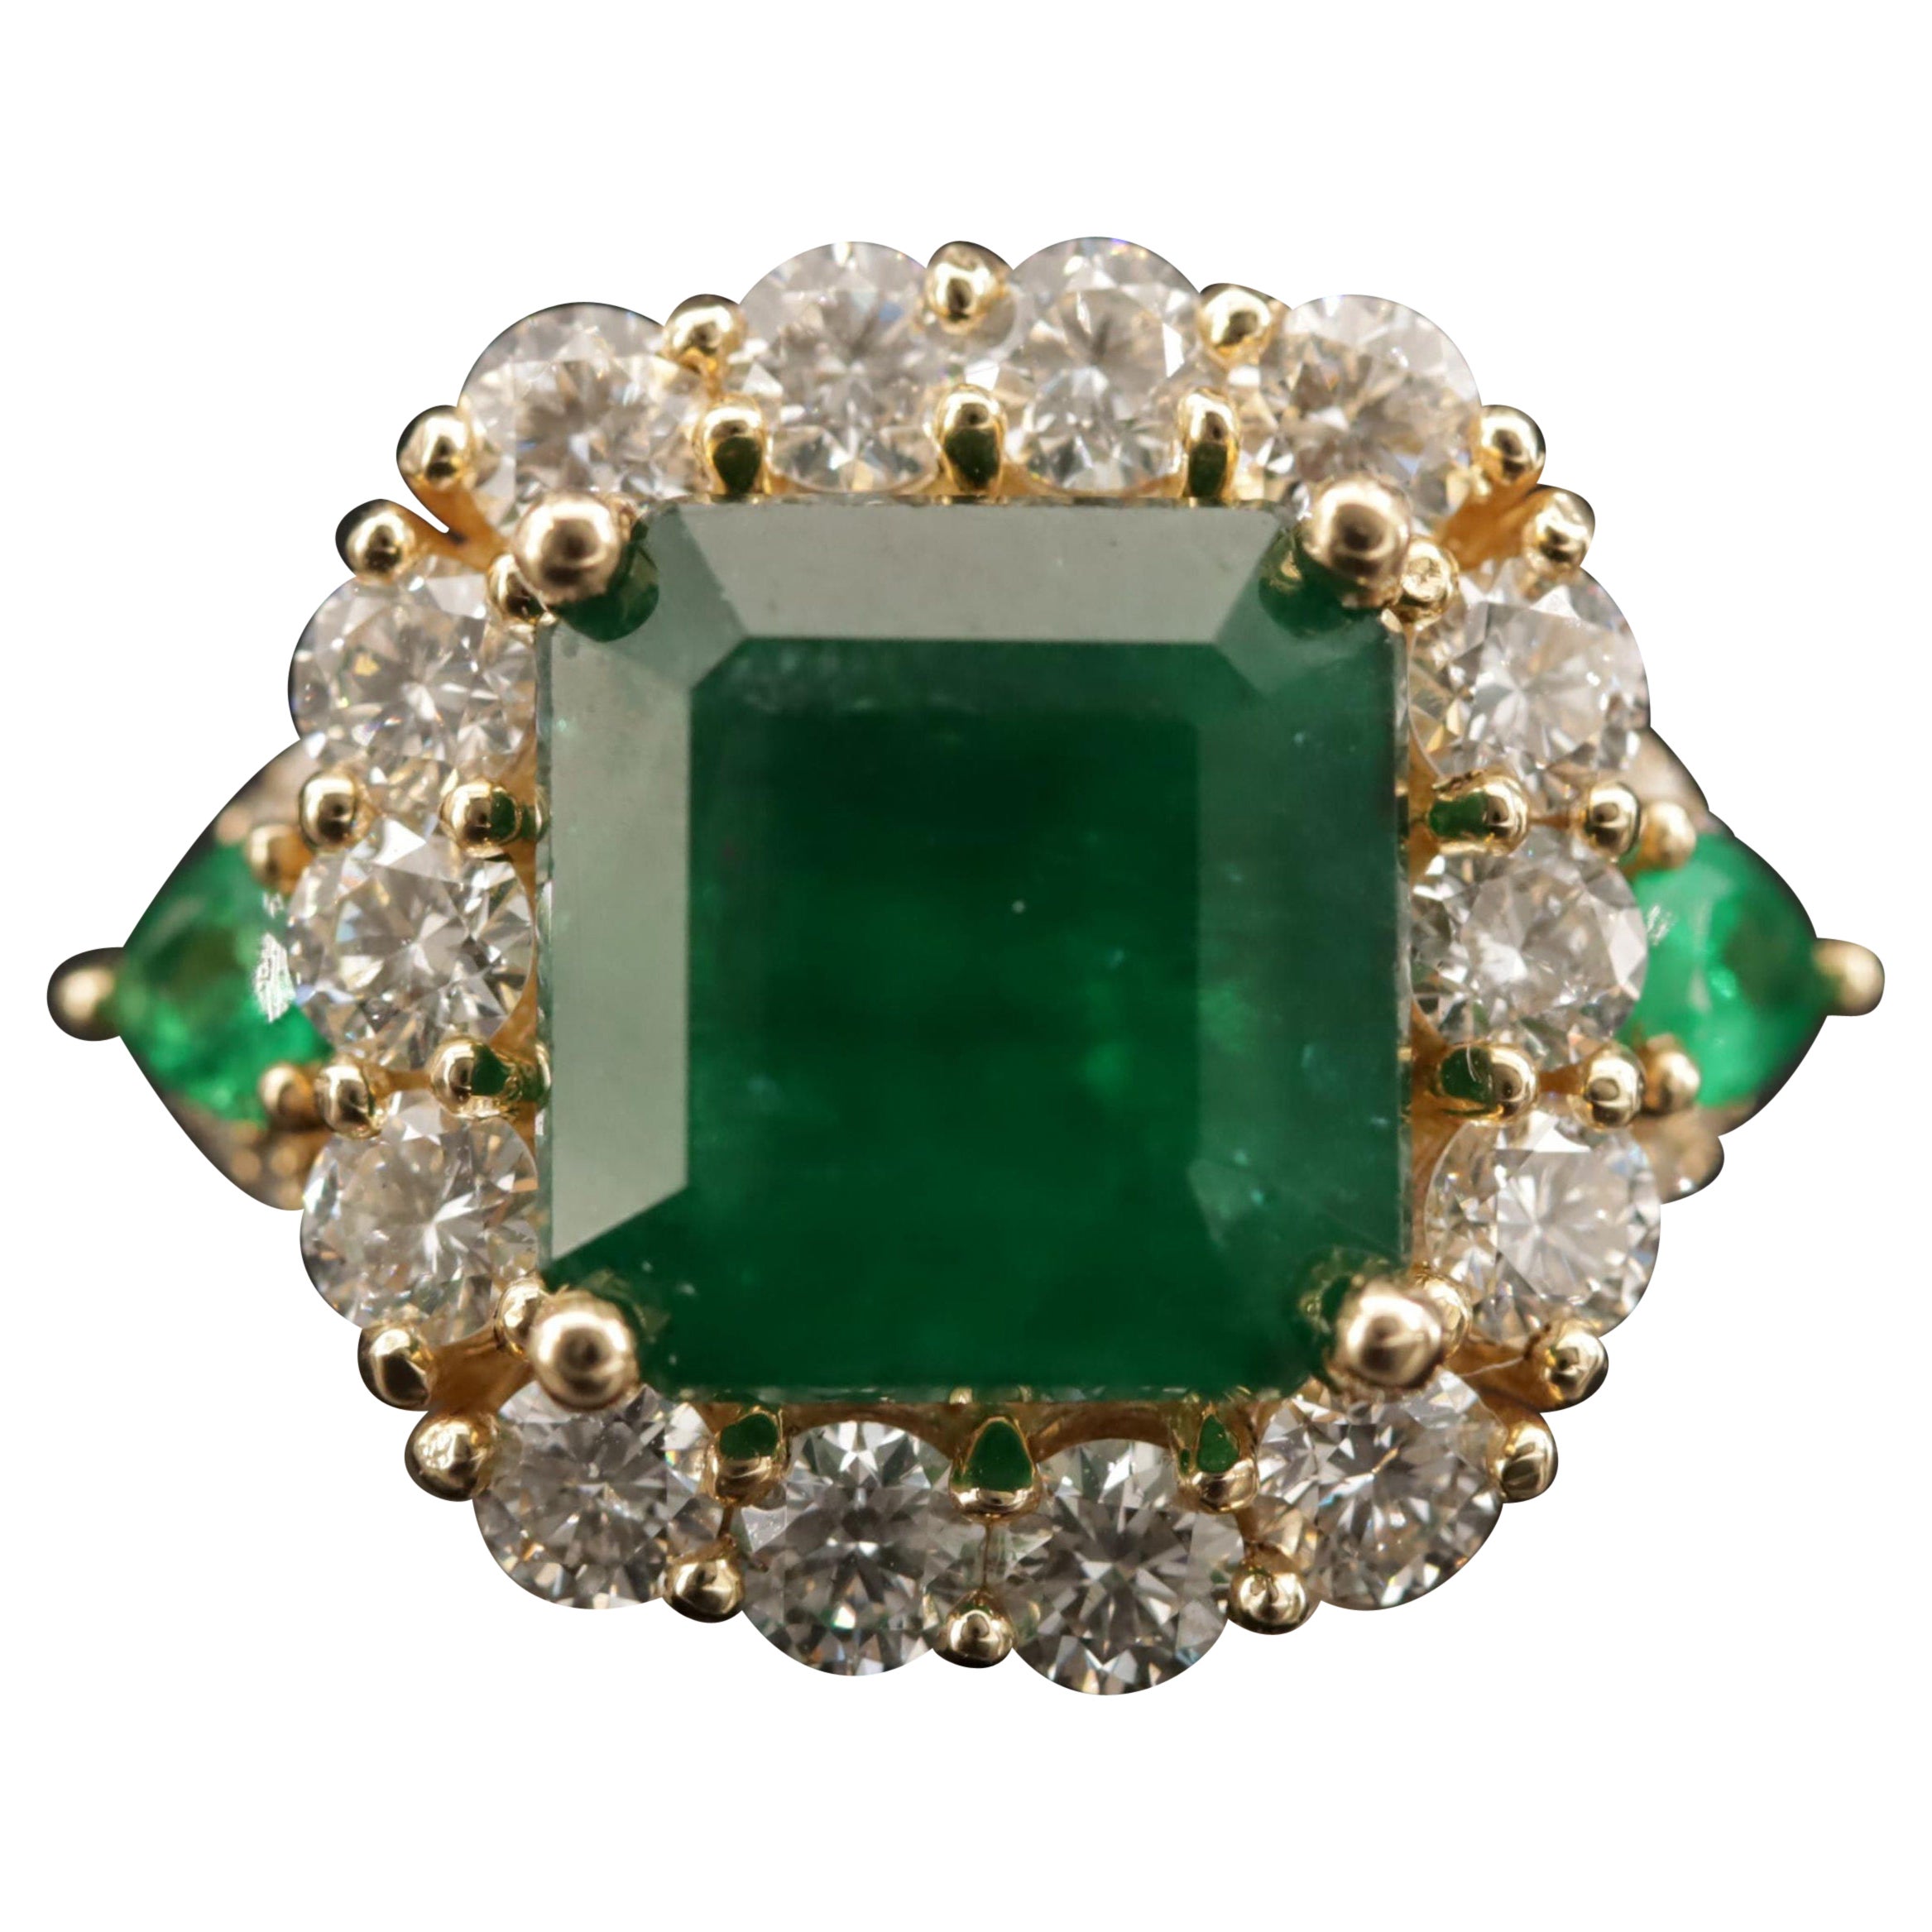 For Sale:  Art Deco 3 Carat Natural Emerald Diamond Cocktail Ring, 18K Gold Engagement Ring